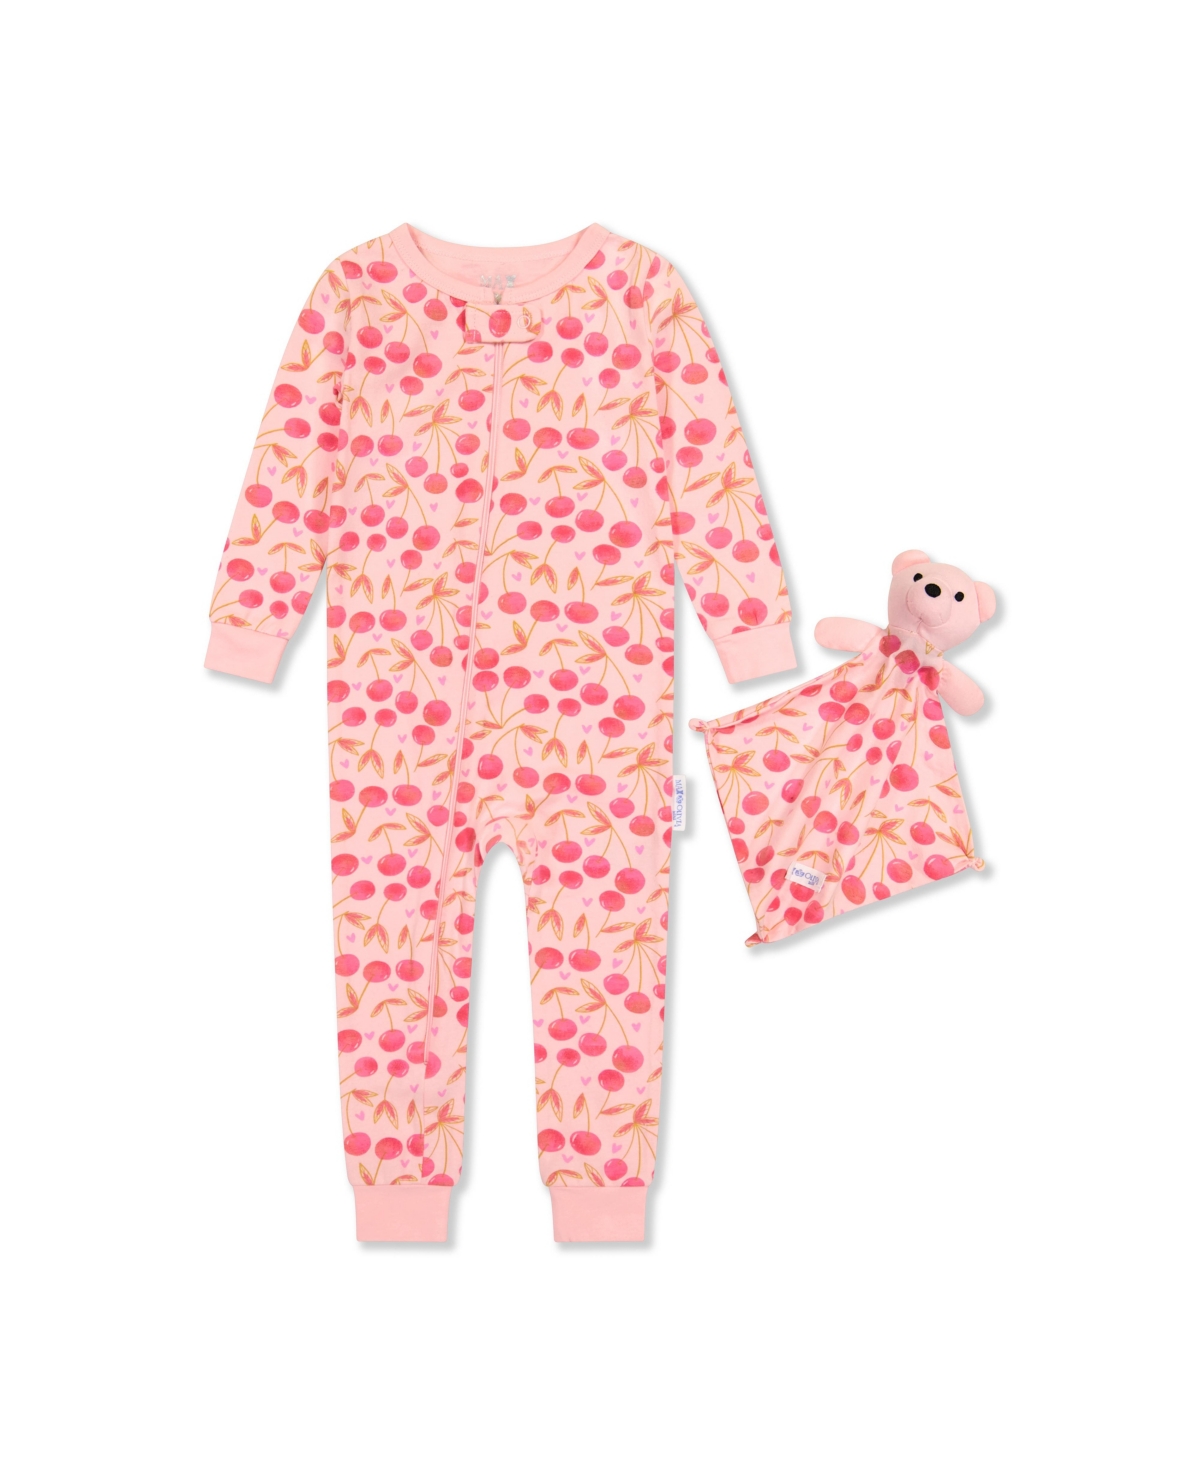 Max & Olivia Baby Girls 1 Piece Snug Fit Pajama With Matching Blankie Baby In Pink